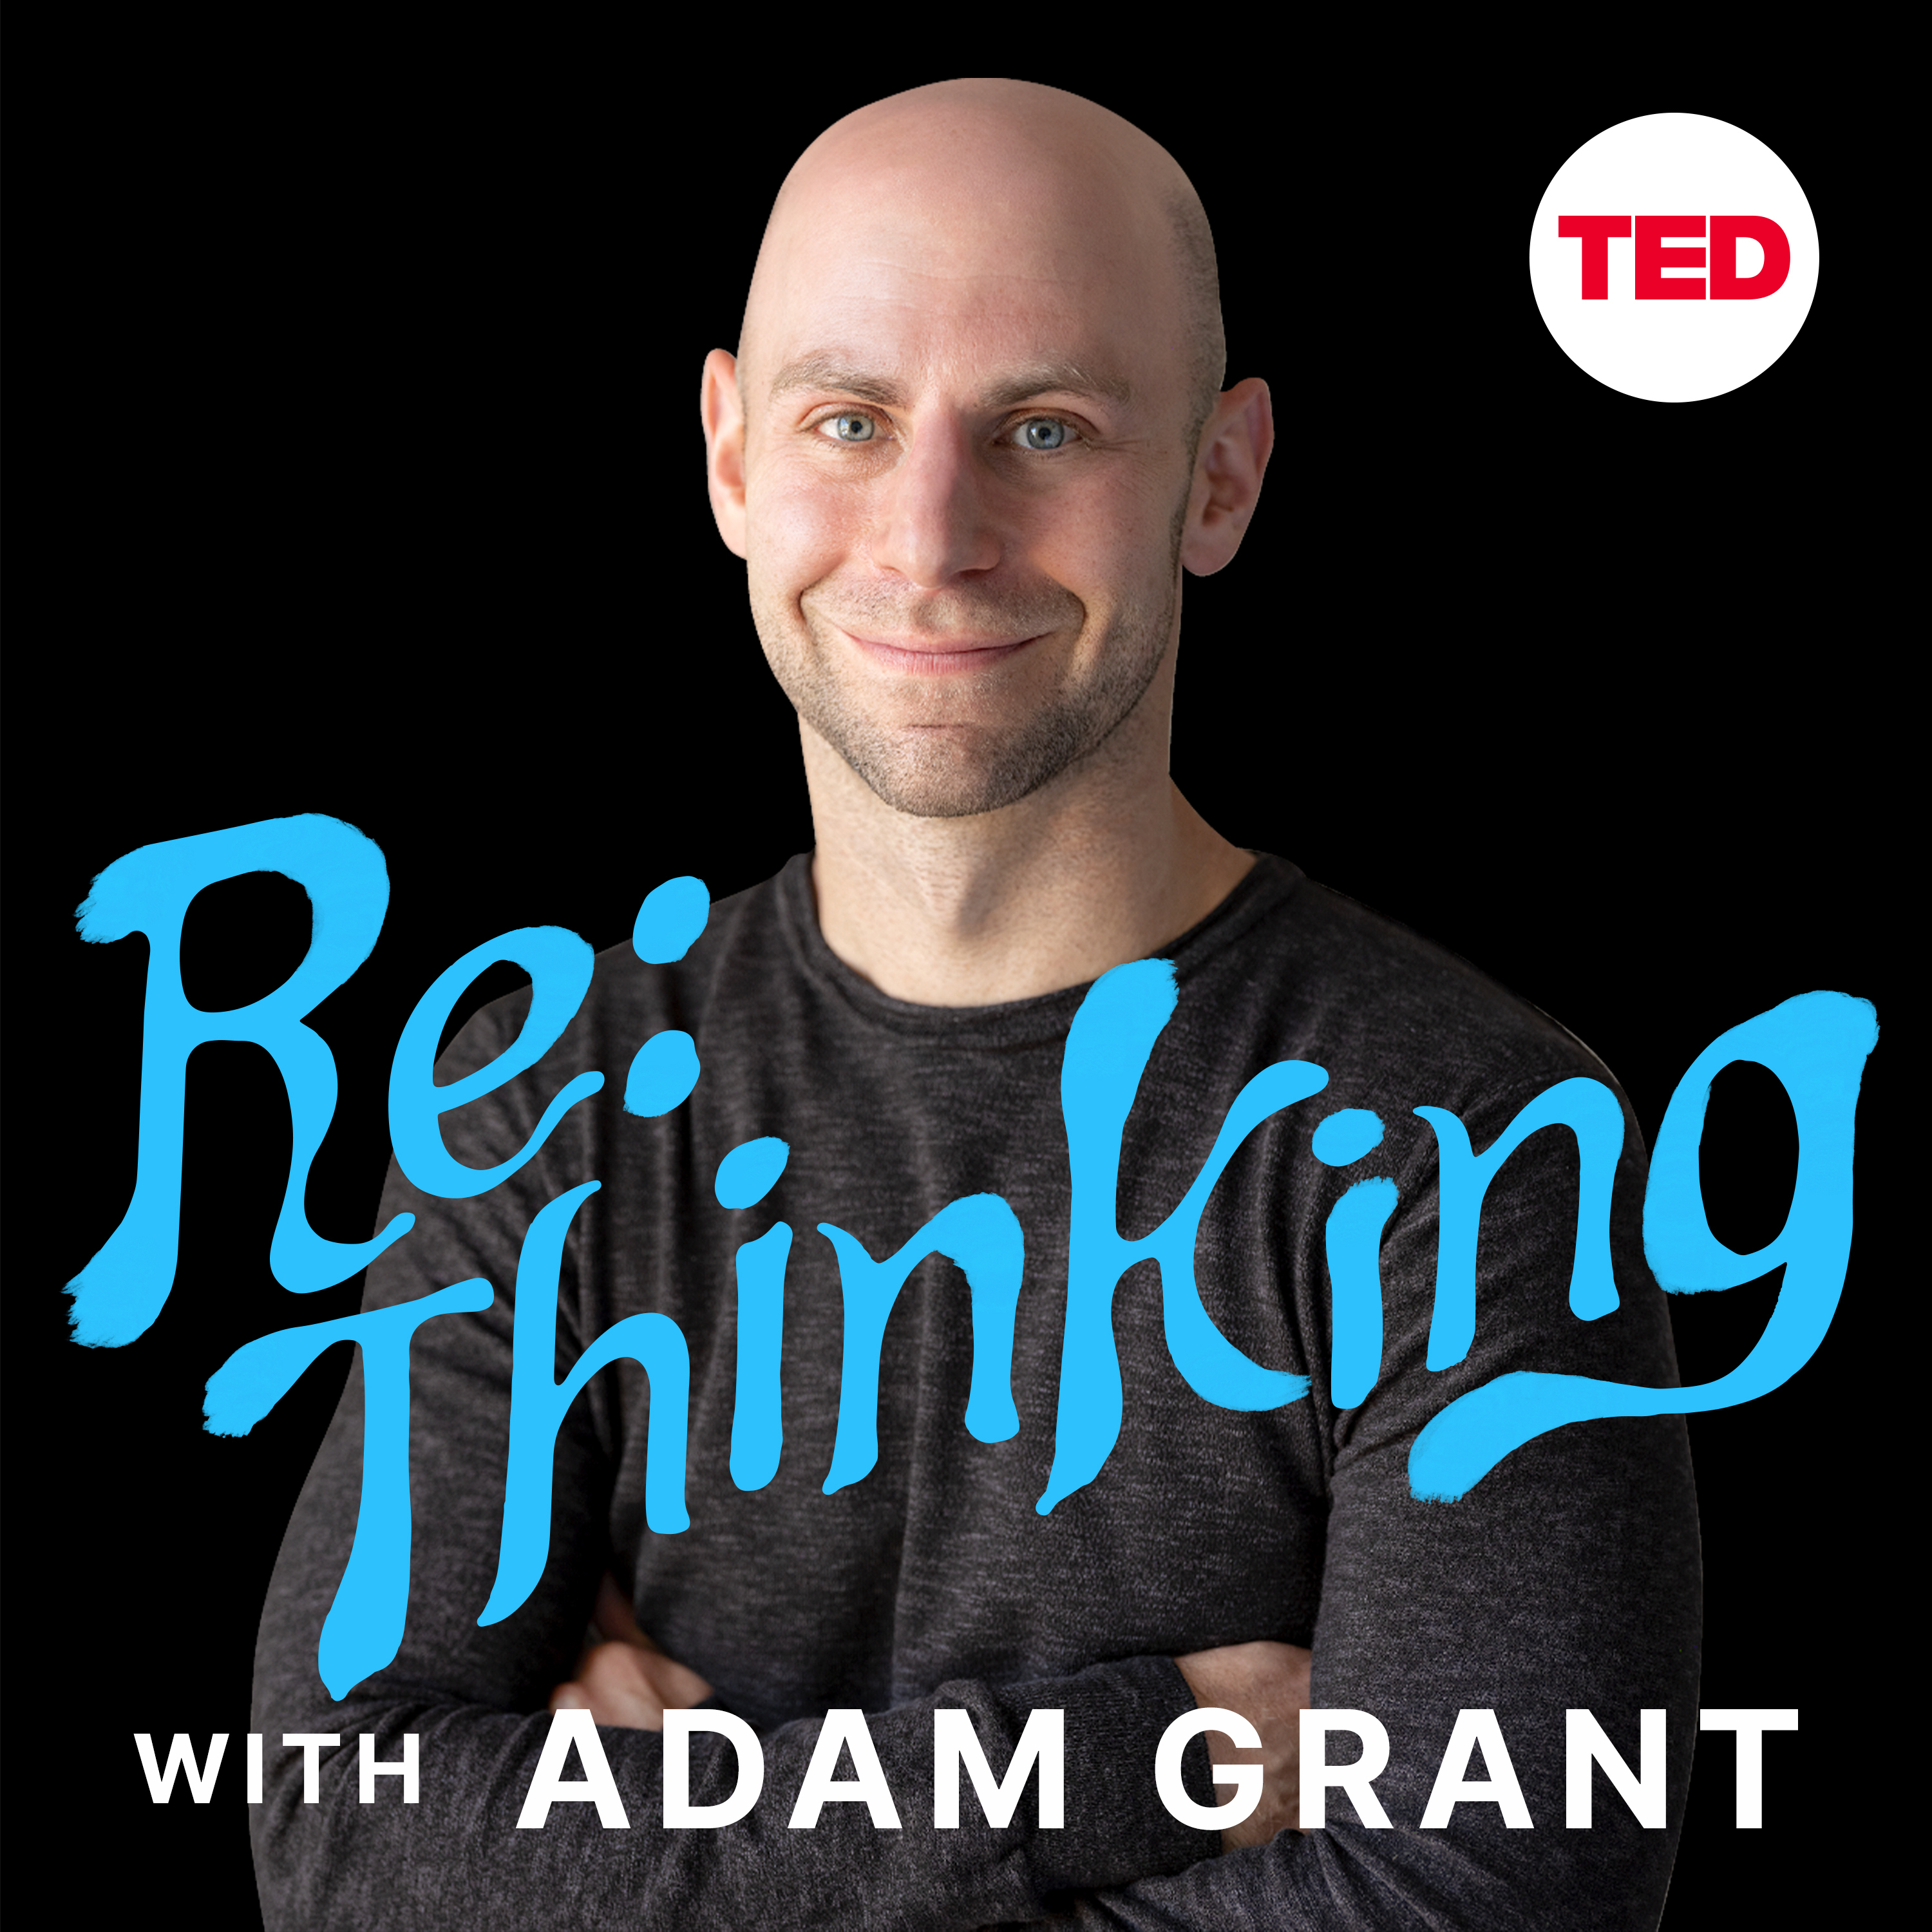 “ReThinking with Adam Grant”: New podcast challenges listeners to let go of old ideas and gain new perspective